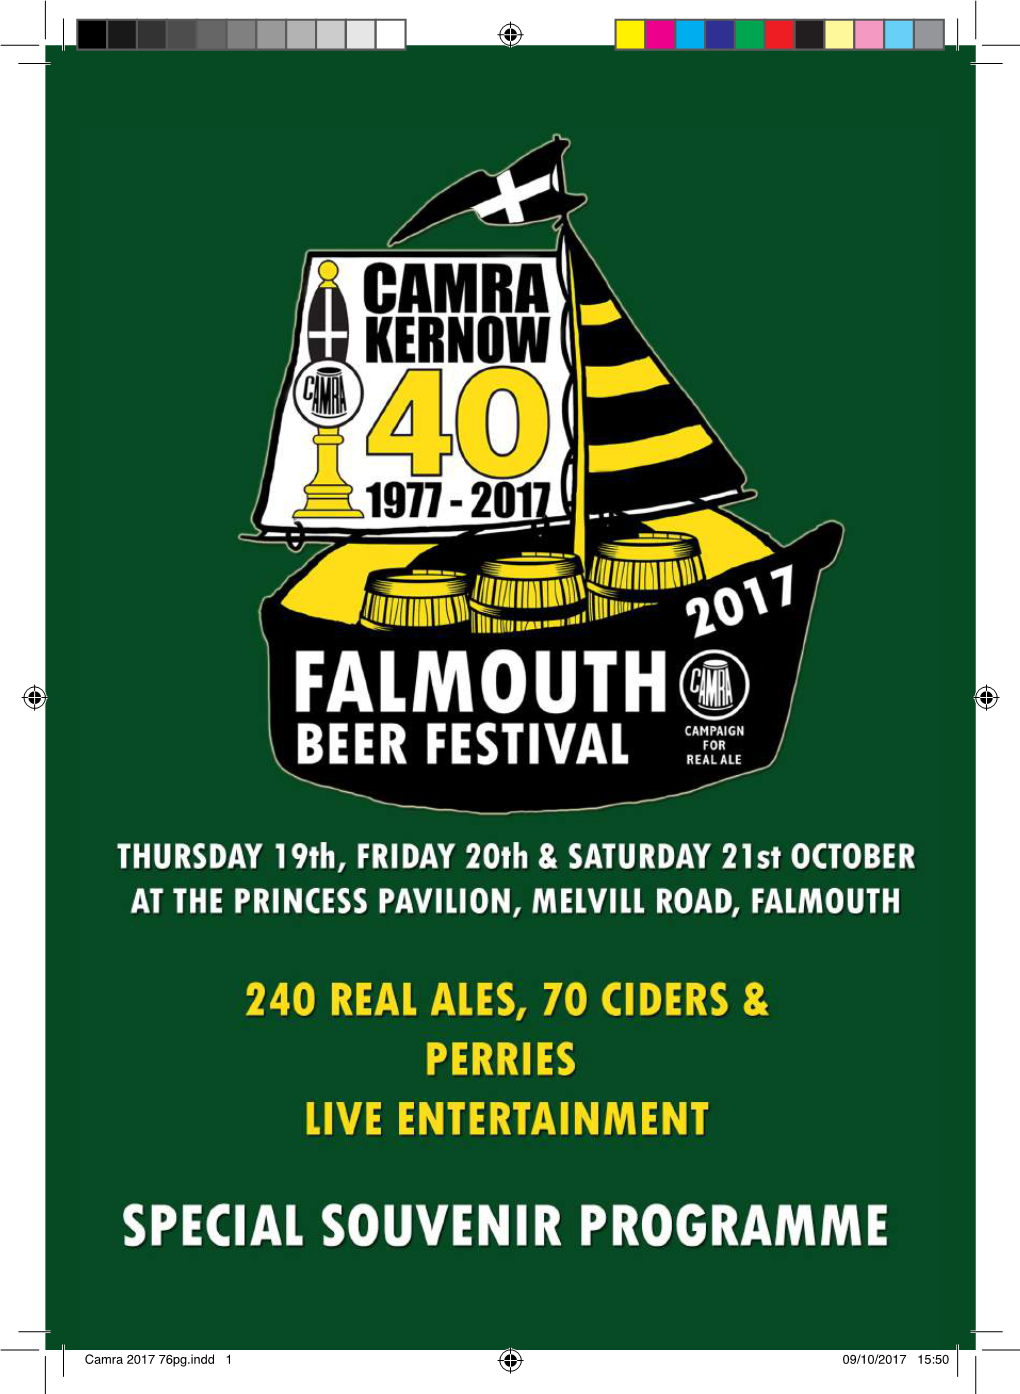 Falmouth Beer Festival 2017